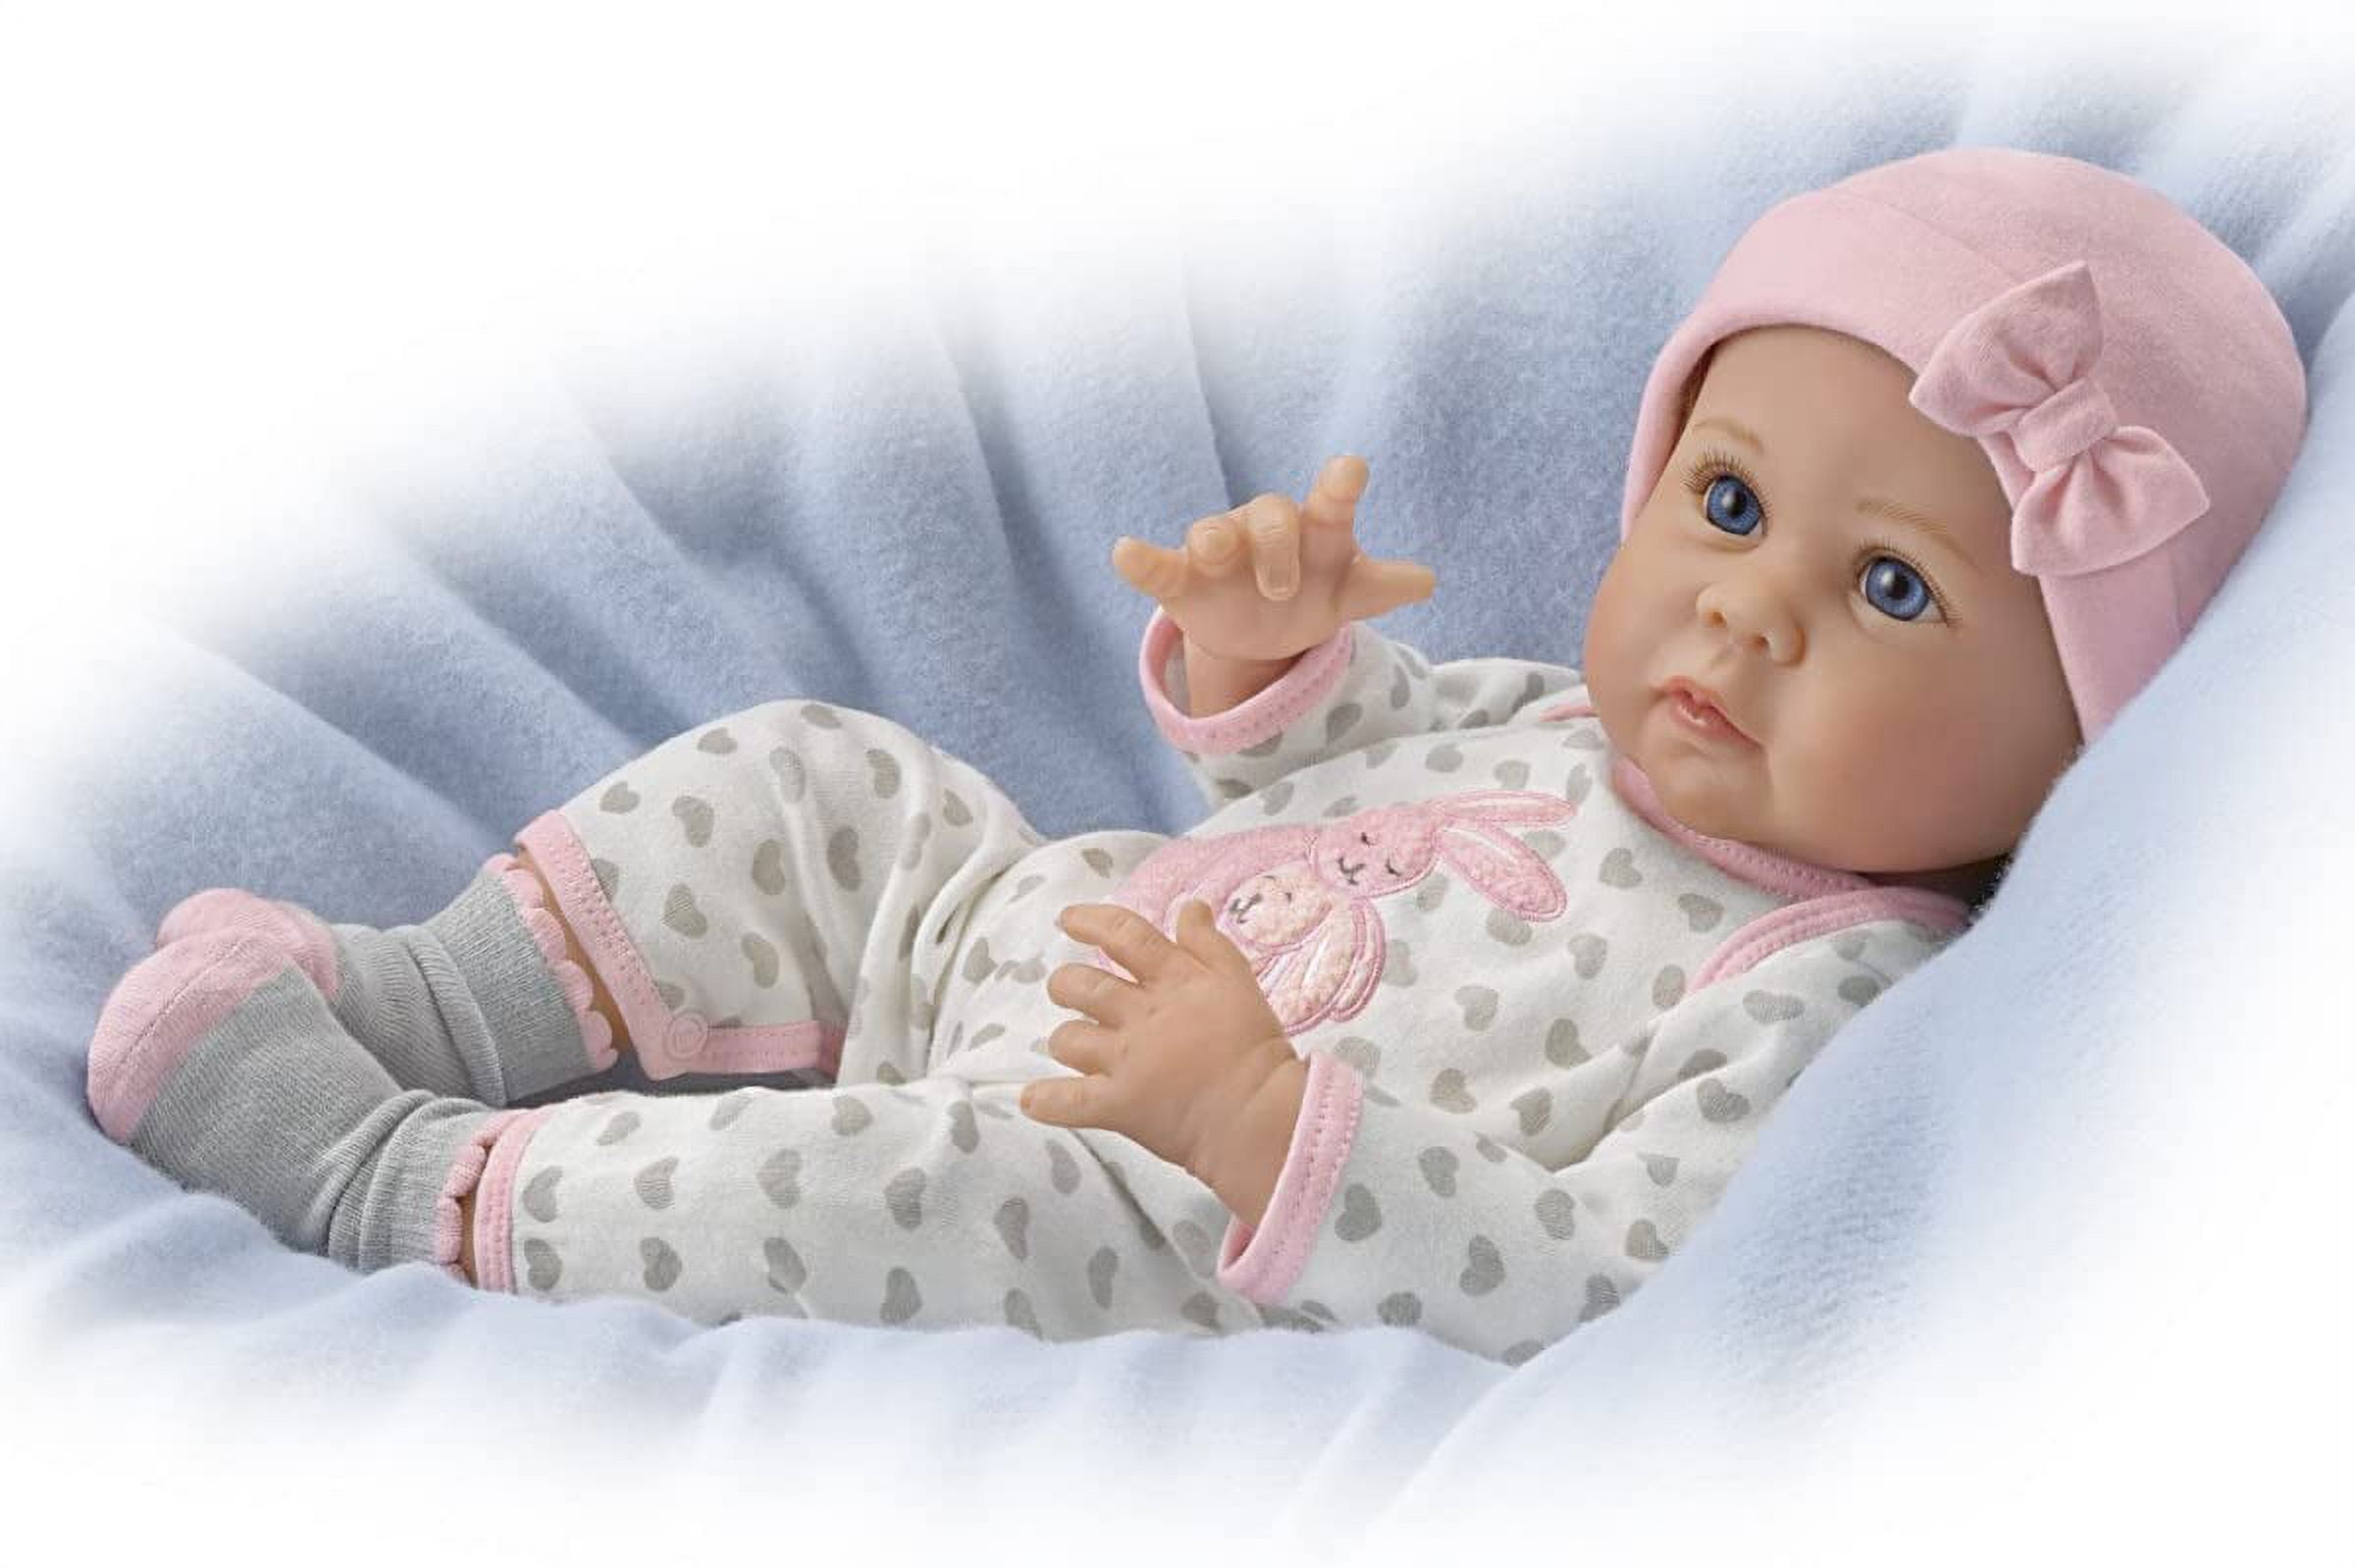 The Ashton - Drake Galleries Somebunny Loves You So Truly Real® Baby Girl  Doll Realistic Weighted Fully Poseable with Soft RealTouch® Vinyl Skin by  Master Doll Artist Linda Murray 17-inches 